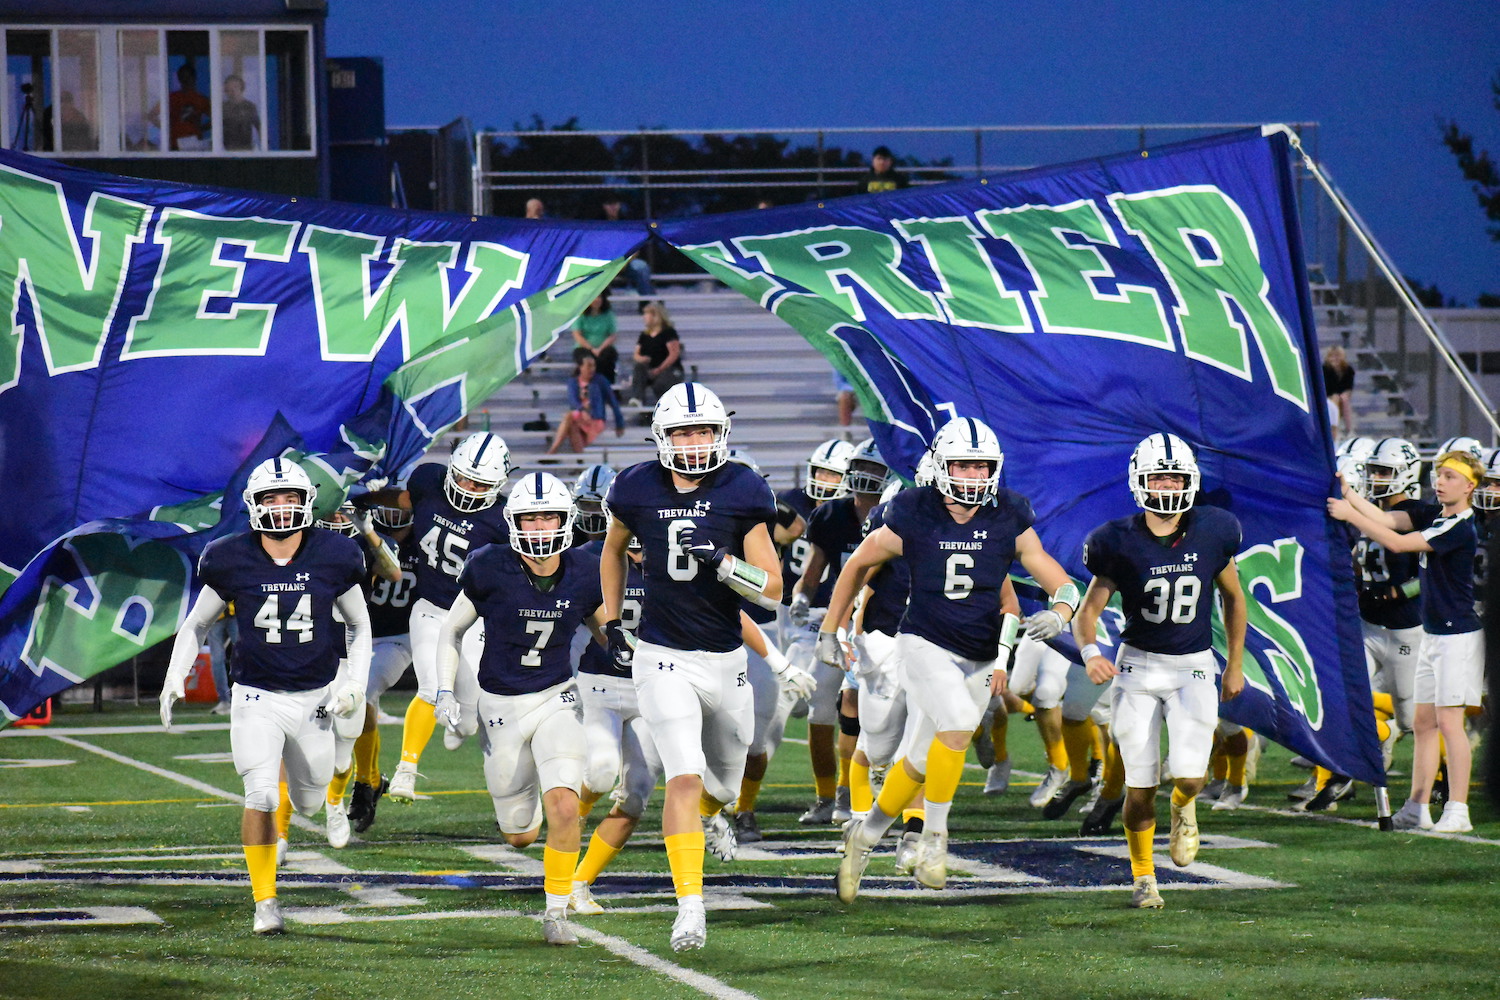 new-trier-outlasts-niles-west-conditions-to-keep-playoff-hopes-alive